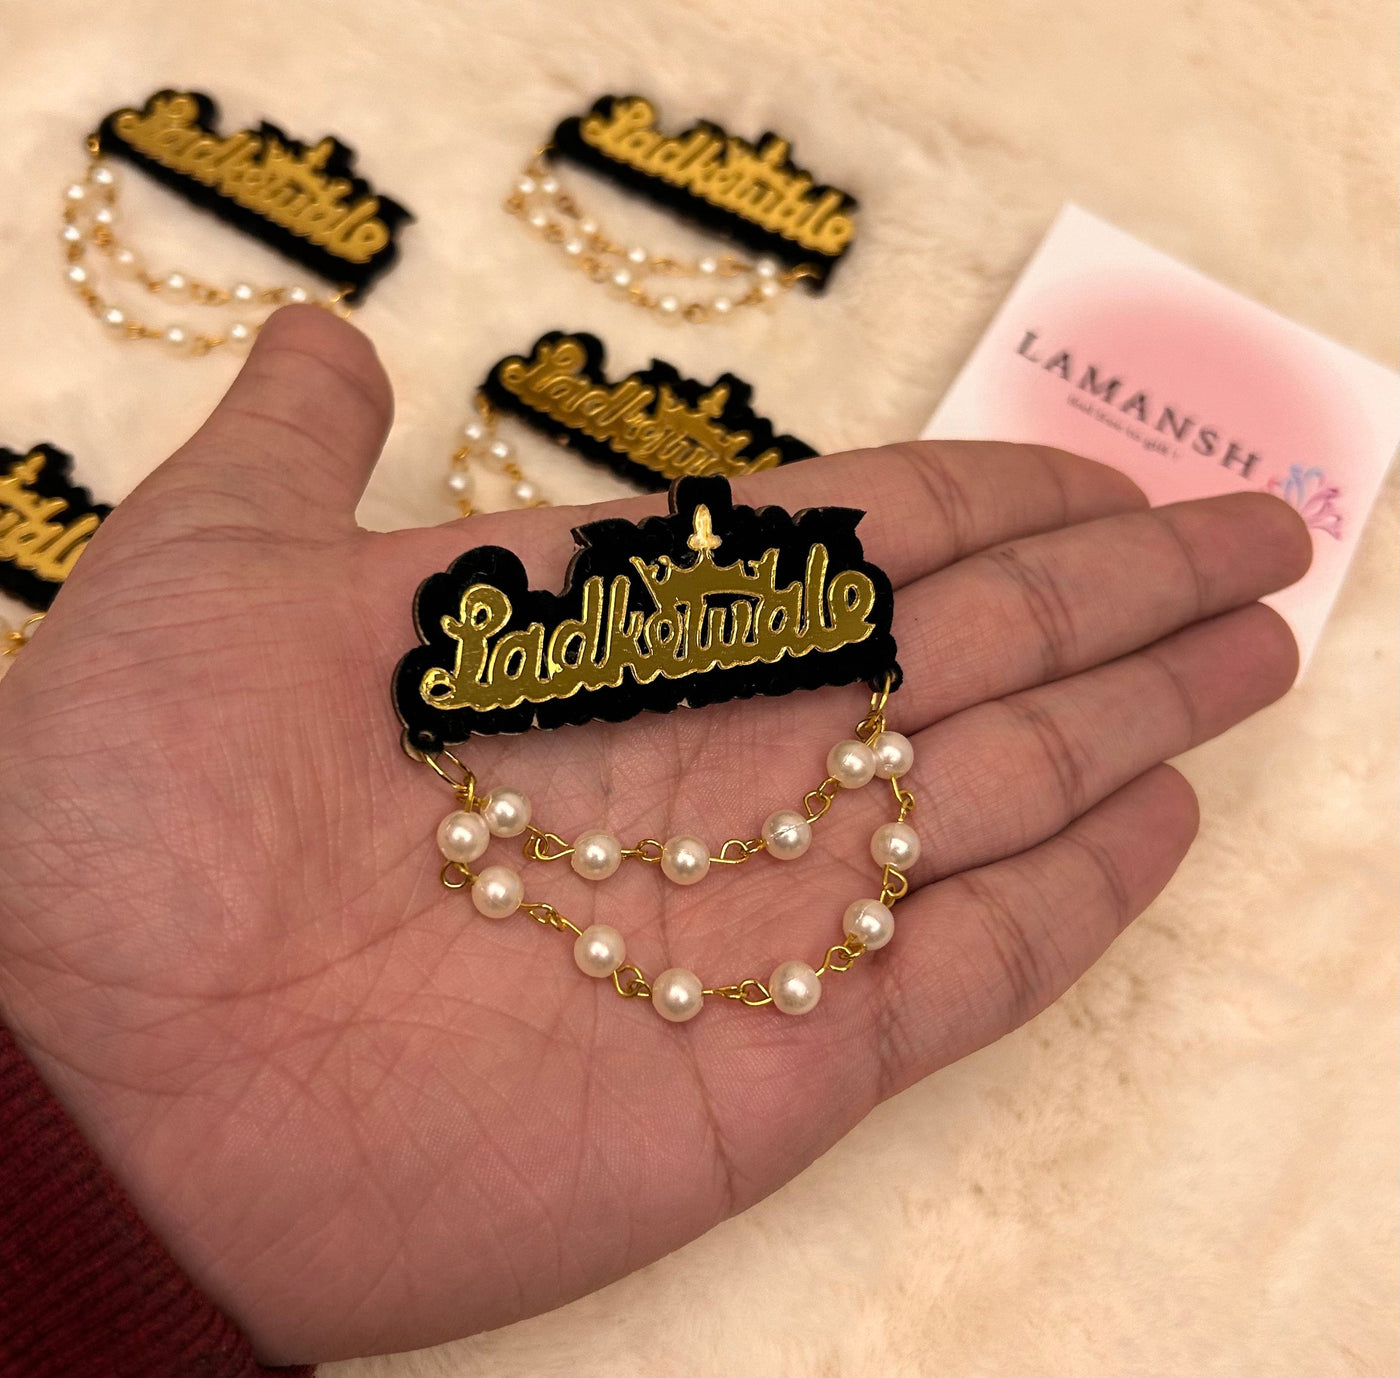 25 Rs each on buying 🏷150+ pcs | Call 📞 at 8619550223 Broaches LAMANSH® Ladkewale Brooches for Barati swagat in wedding / Brooches for Groom side / Quirky Brooches for Guests in Shaadi🎉